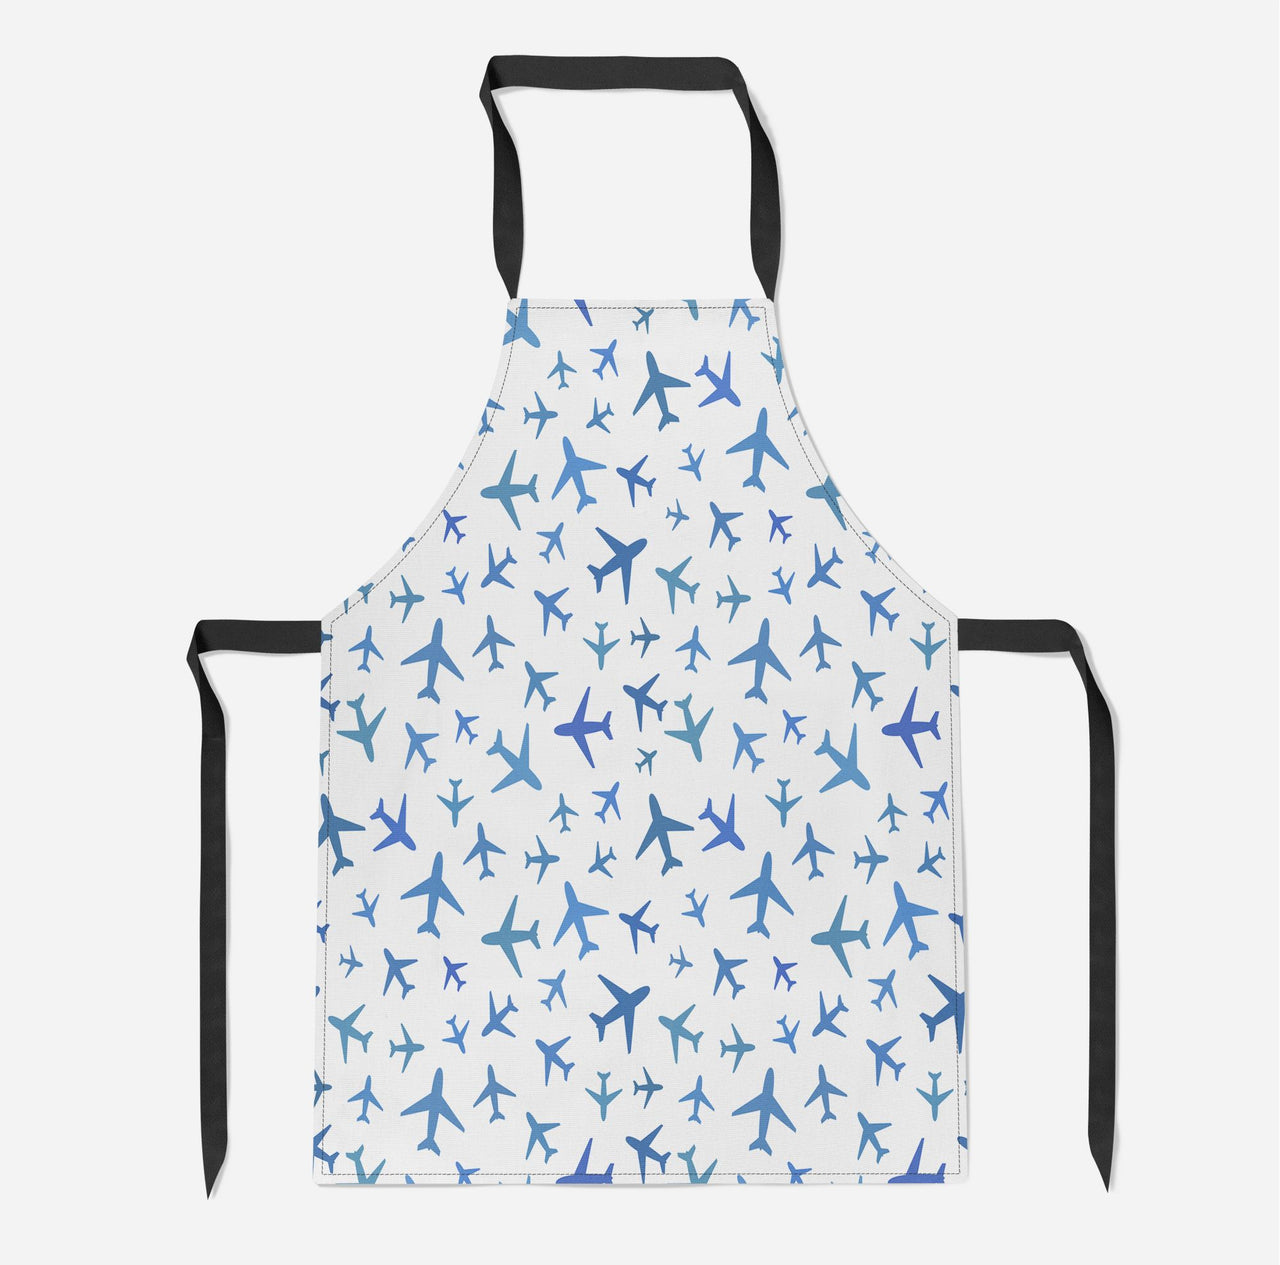 Many Airplanes White Designed Kitchen Aprons